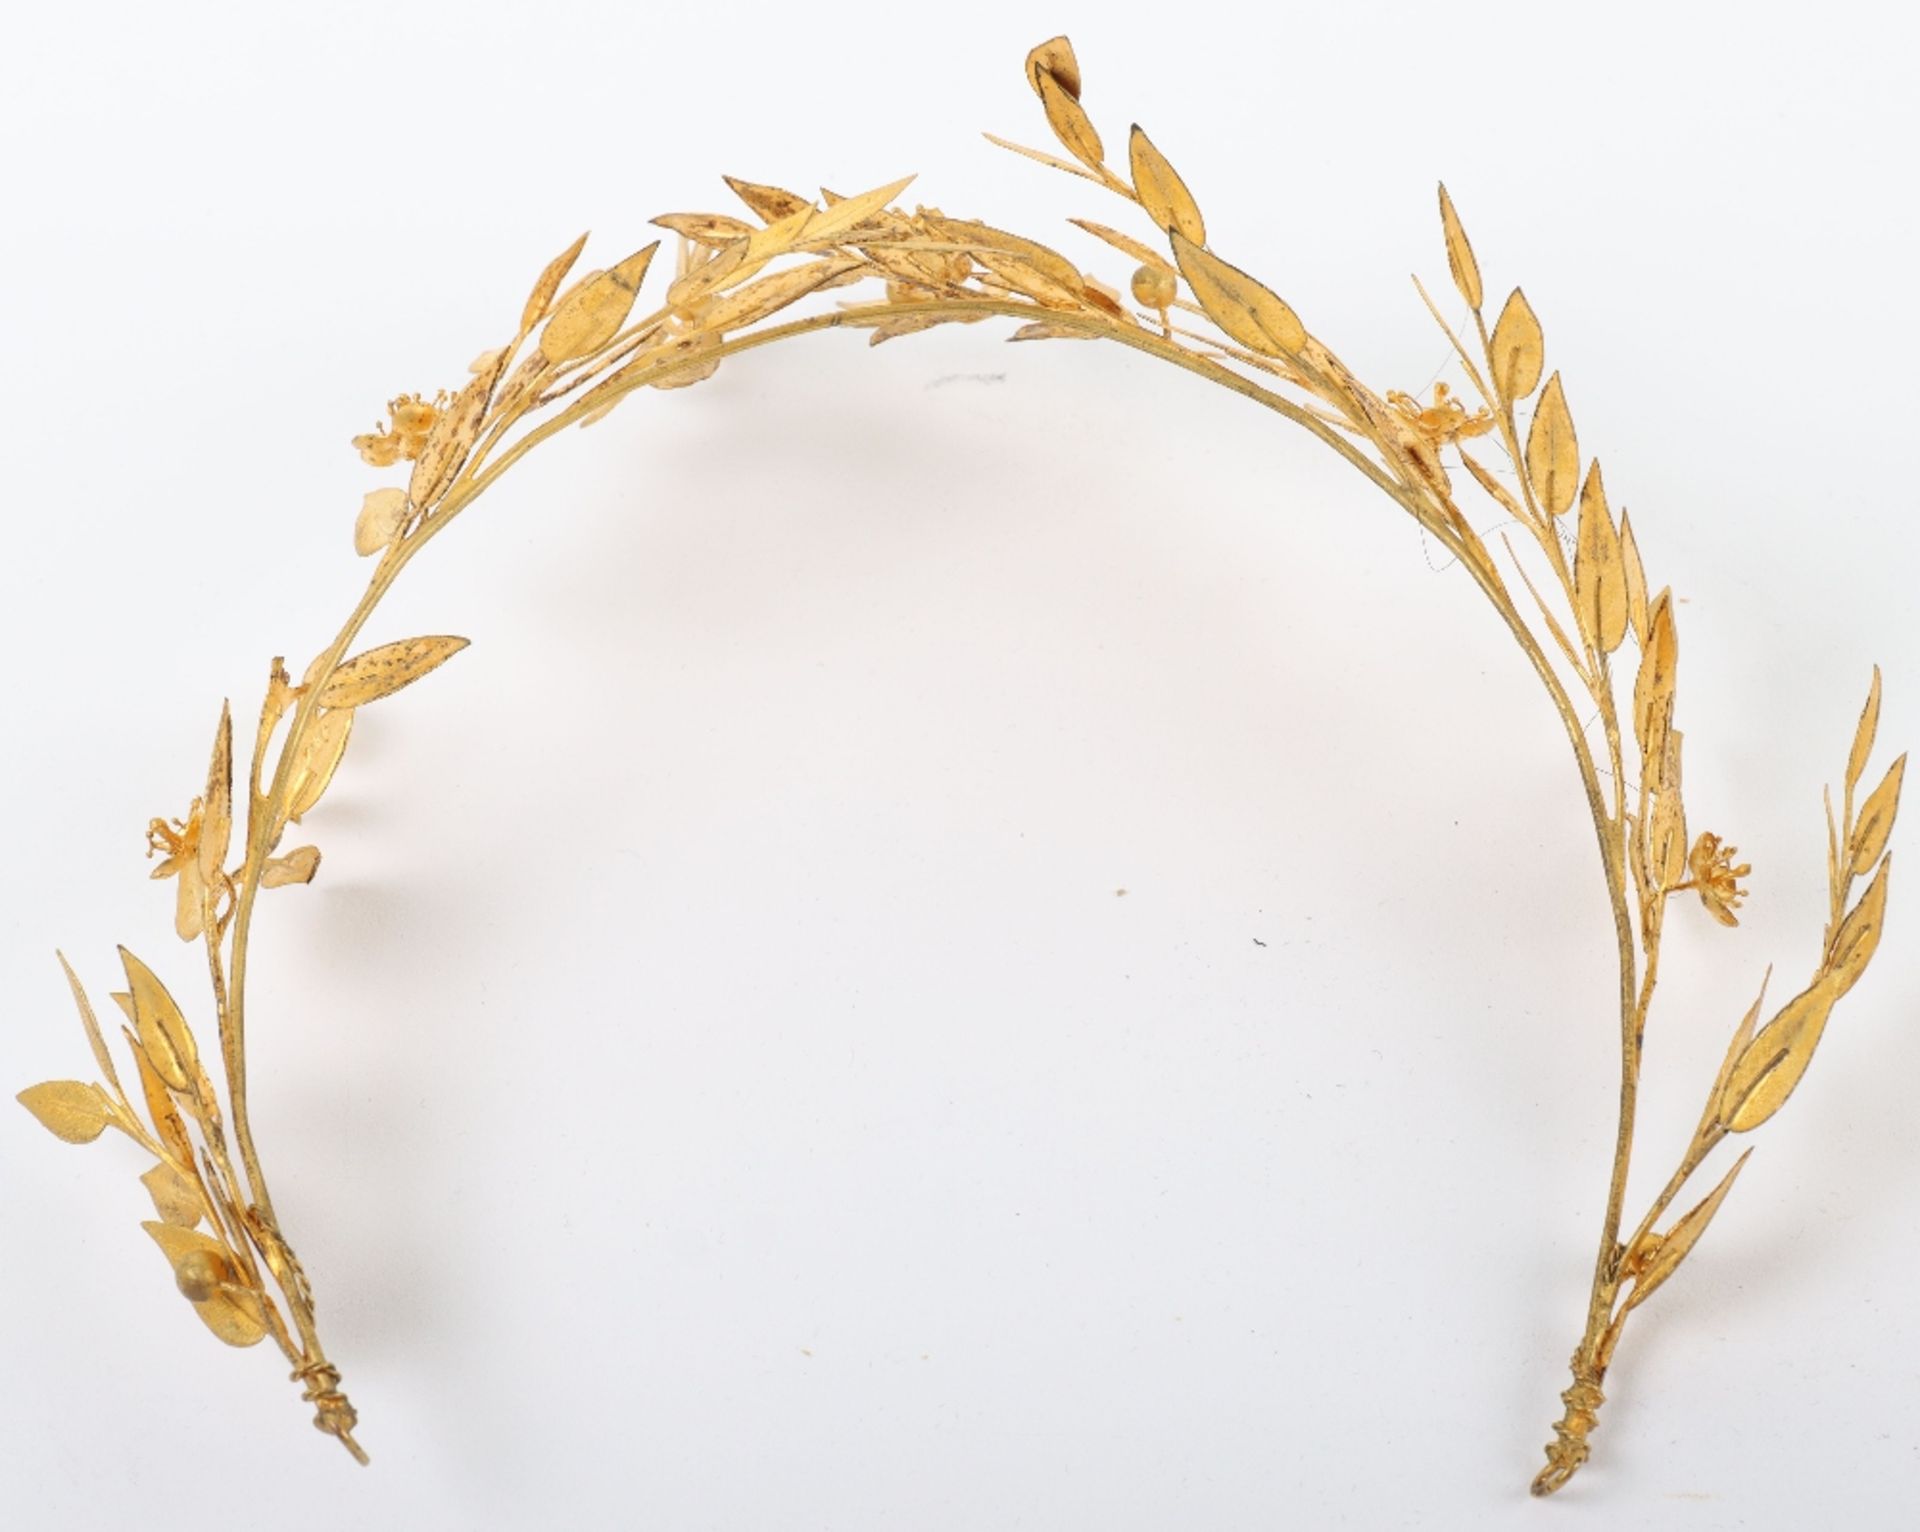 A rare mid 19th century gilt tiara and brooch, possibly English - Image 6 of 10